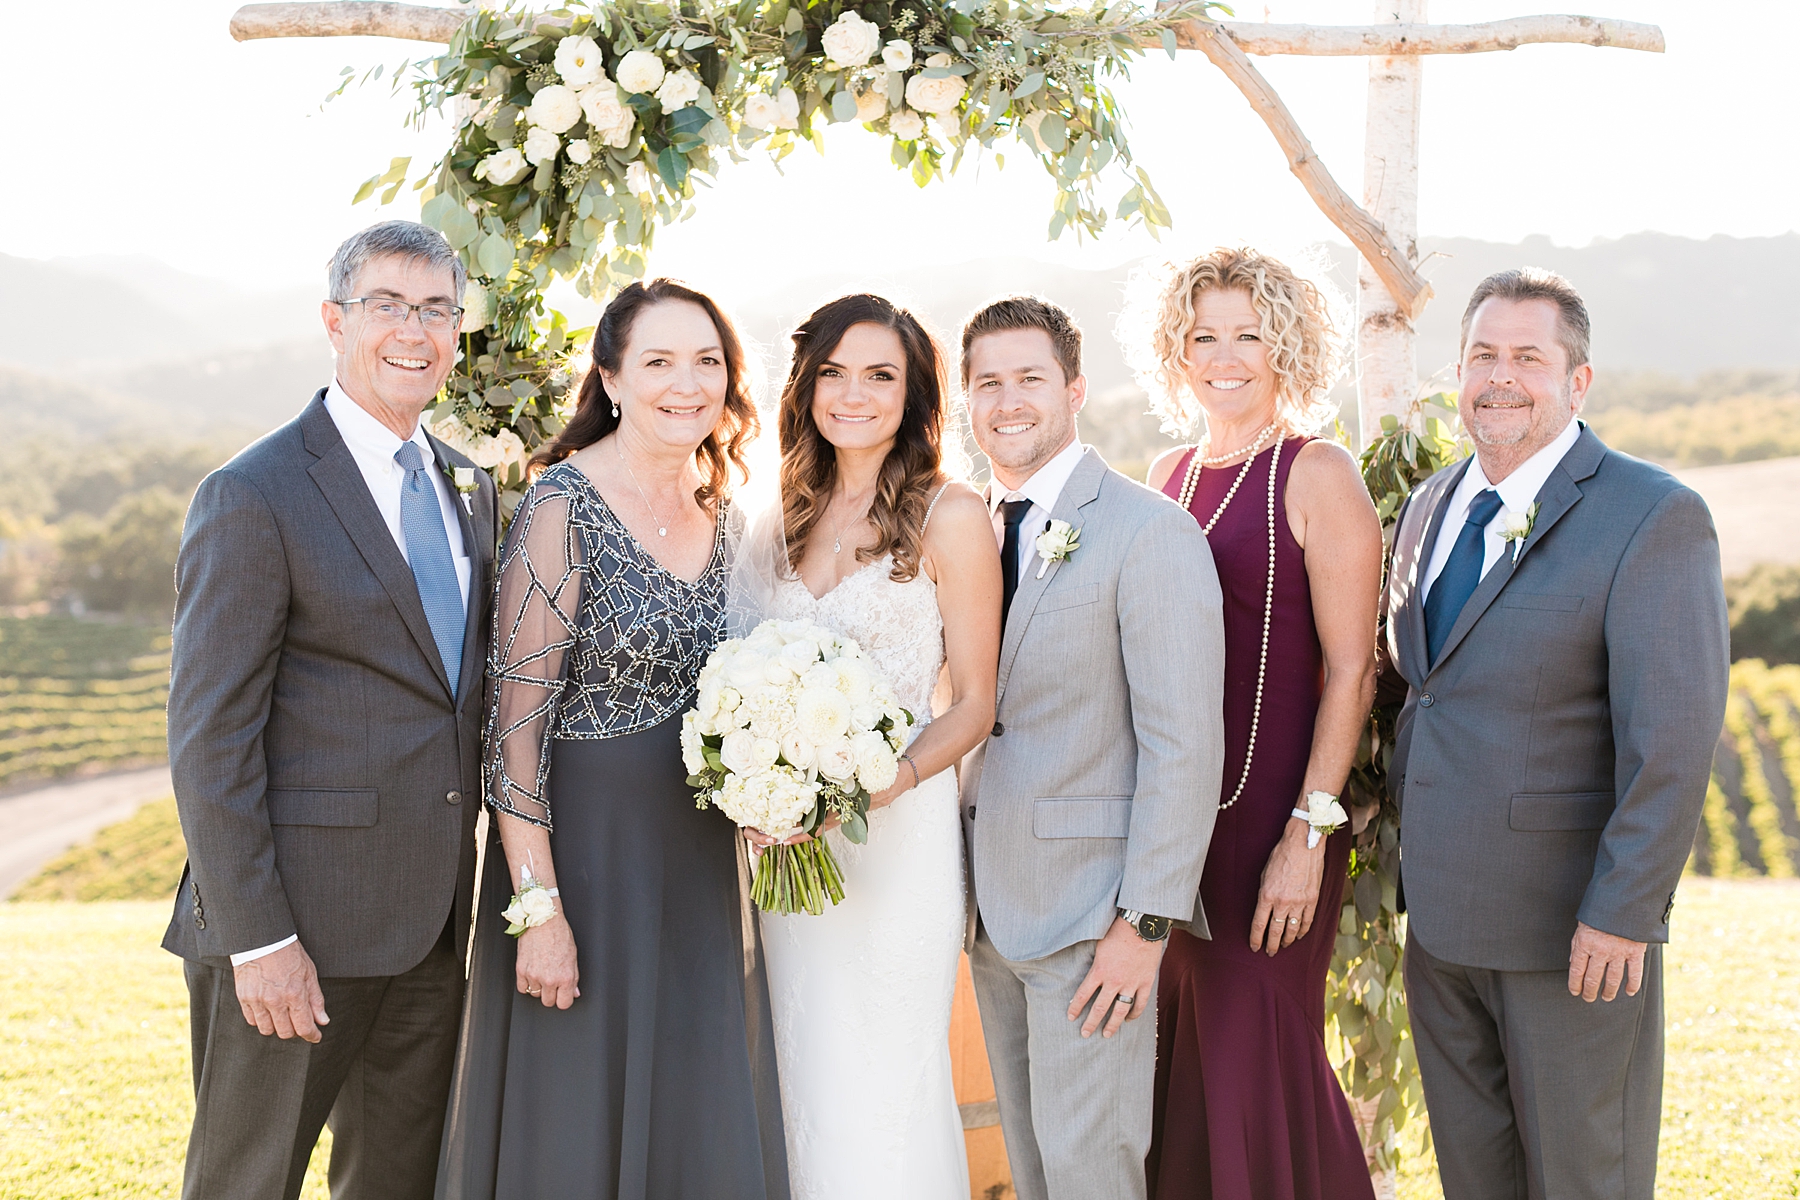 Four steps to help make the family portraits on your wedding day go smoothly